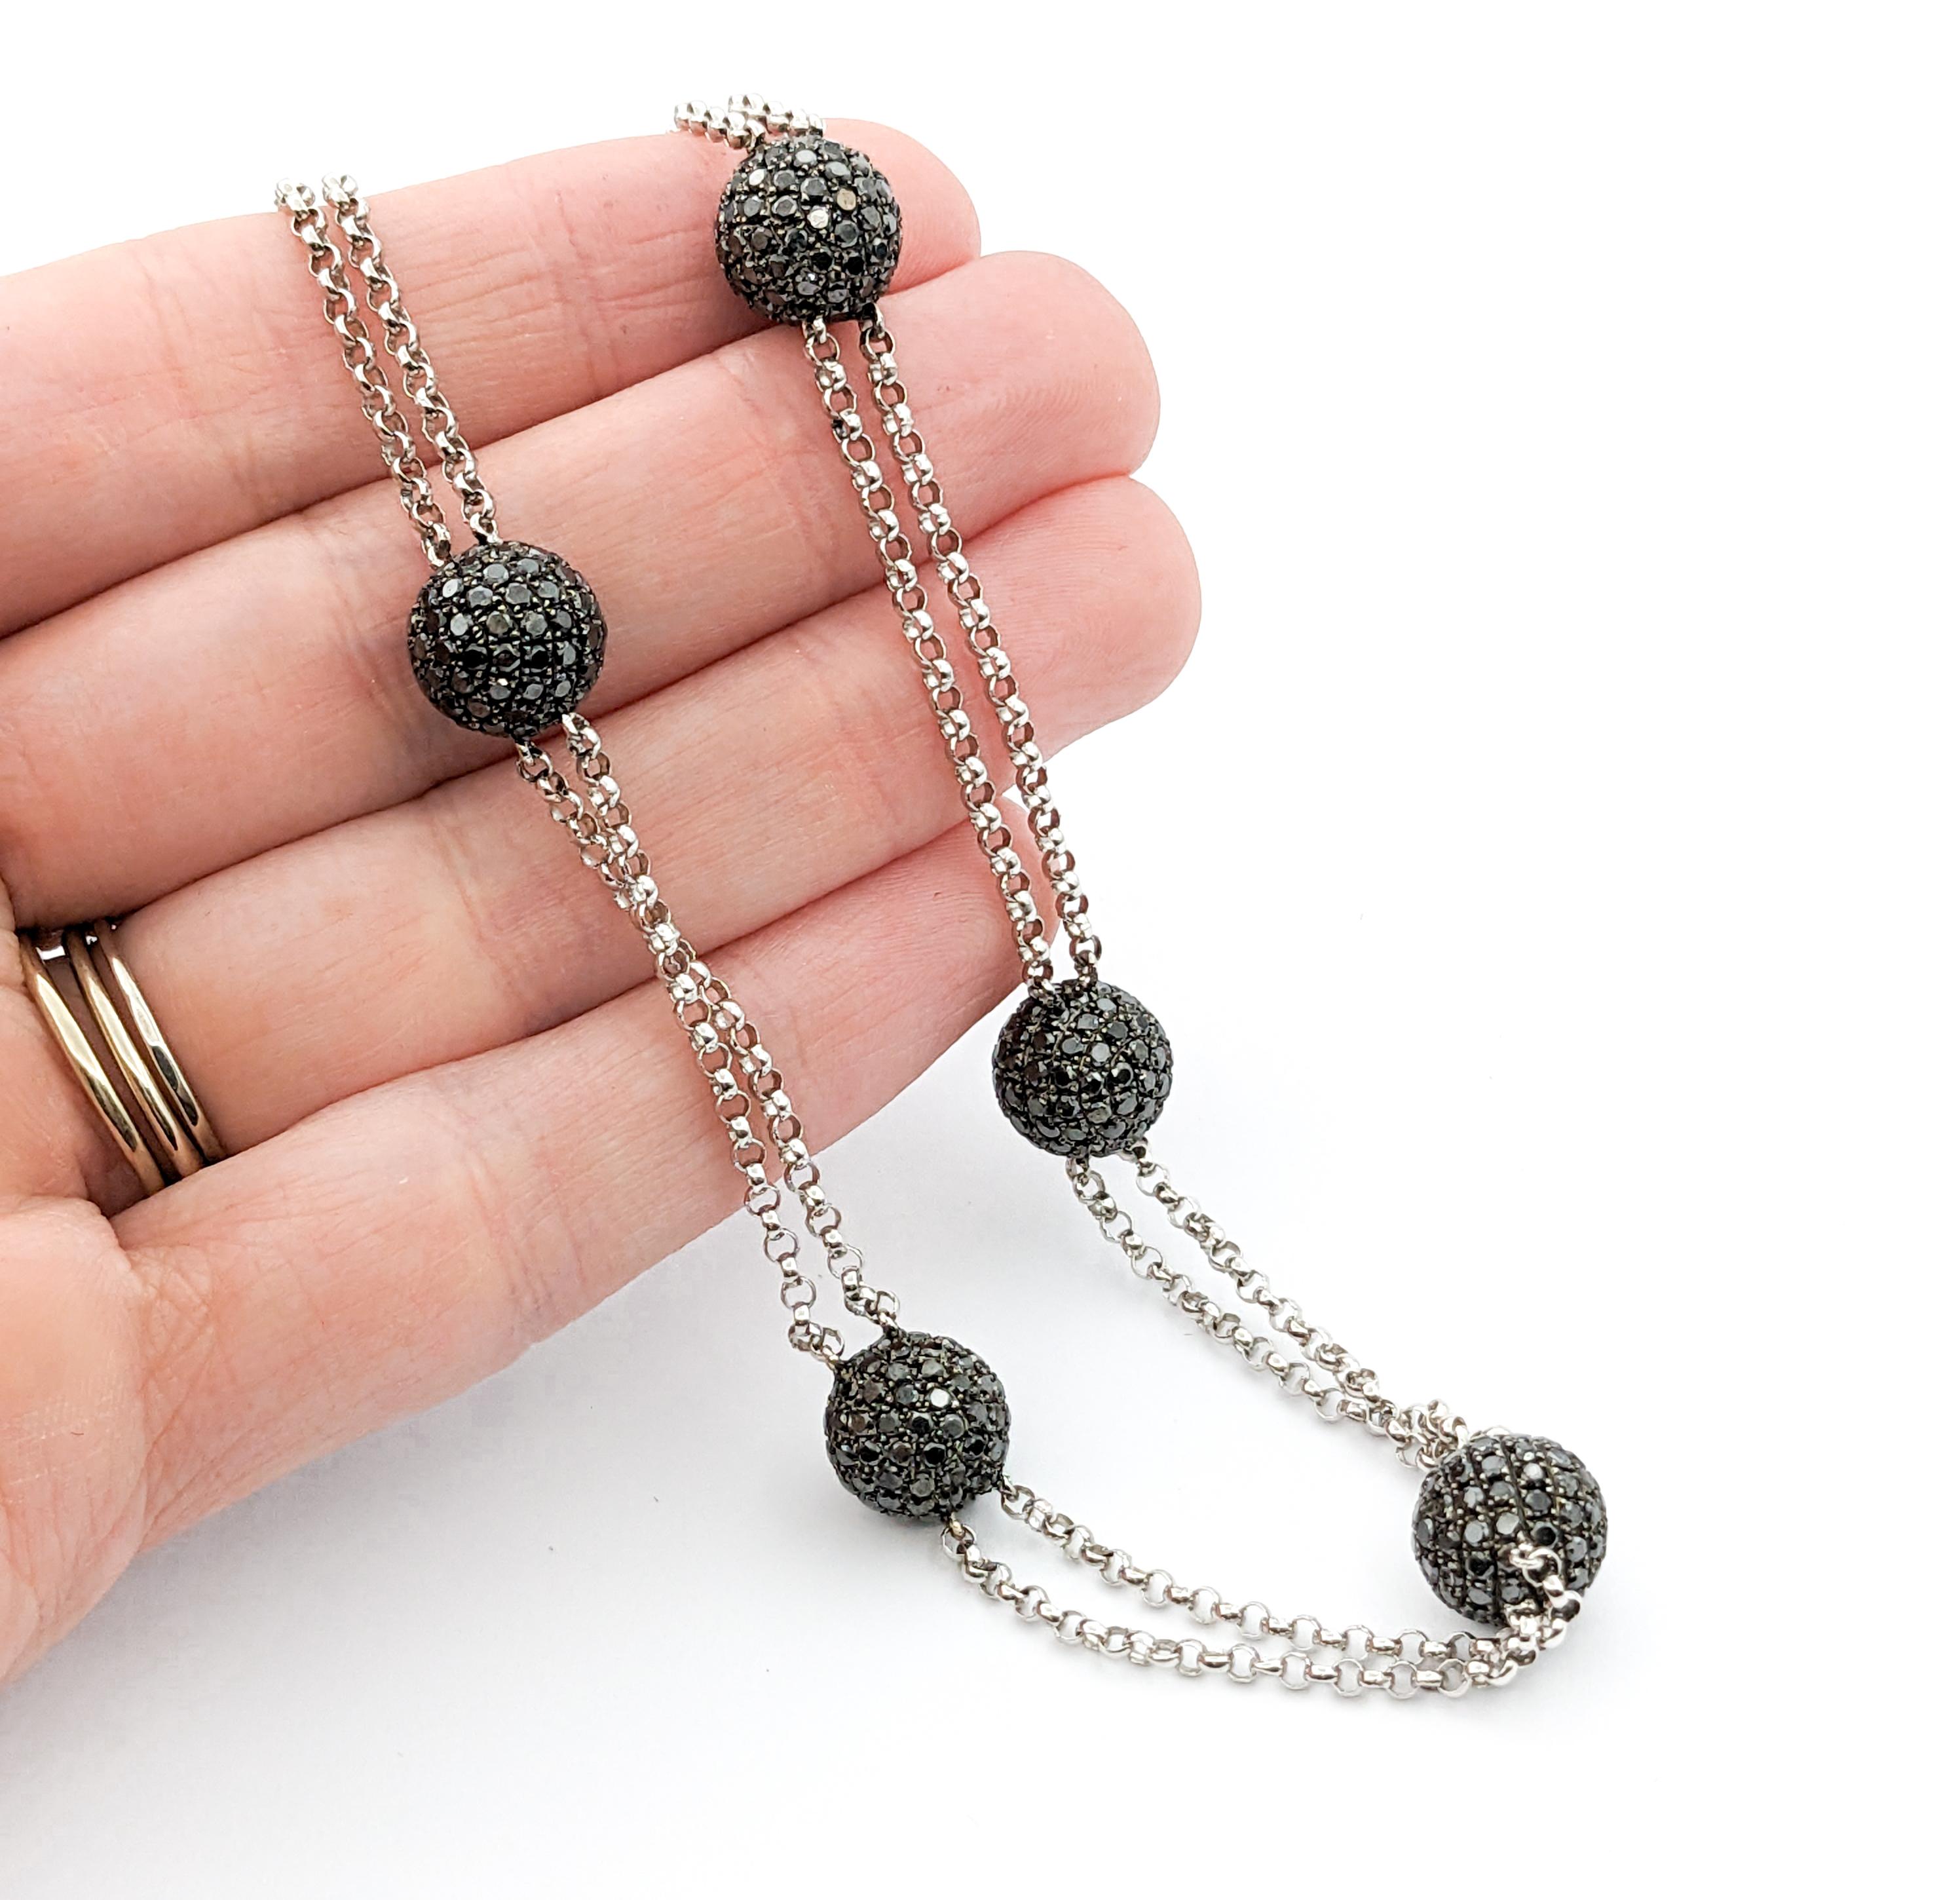 Stylish Black Diamond Station Necklace - 18K White Gold

This fabulous necklace is crafted in 18kt white gold and features 12.50ctw round-cut black diamonds. This necklace is adjustable and measures 18 - 20 inches in length; total weight is